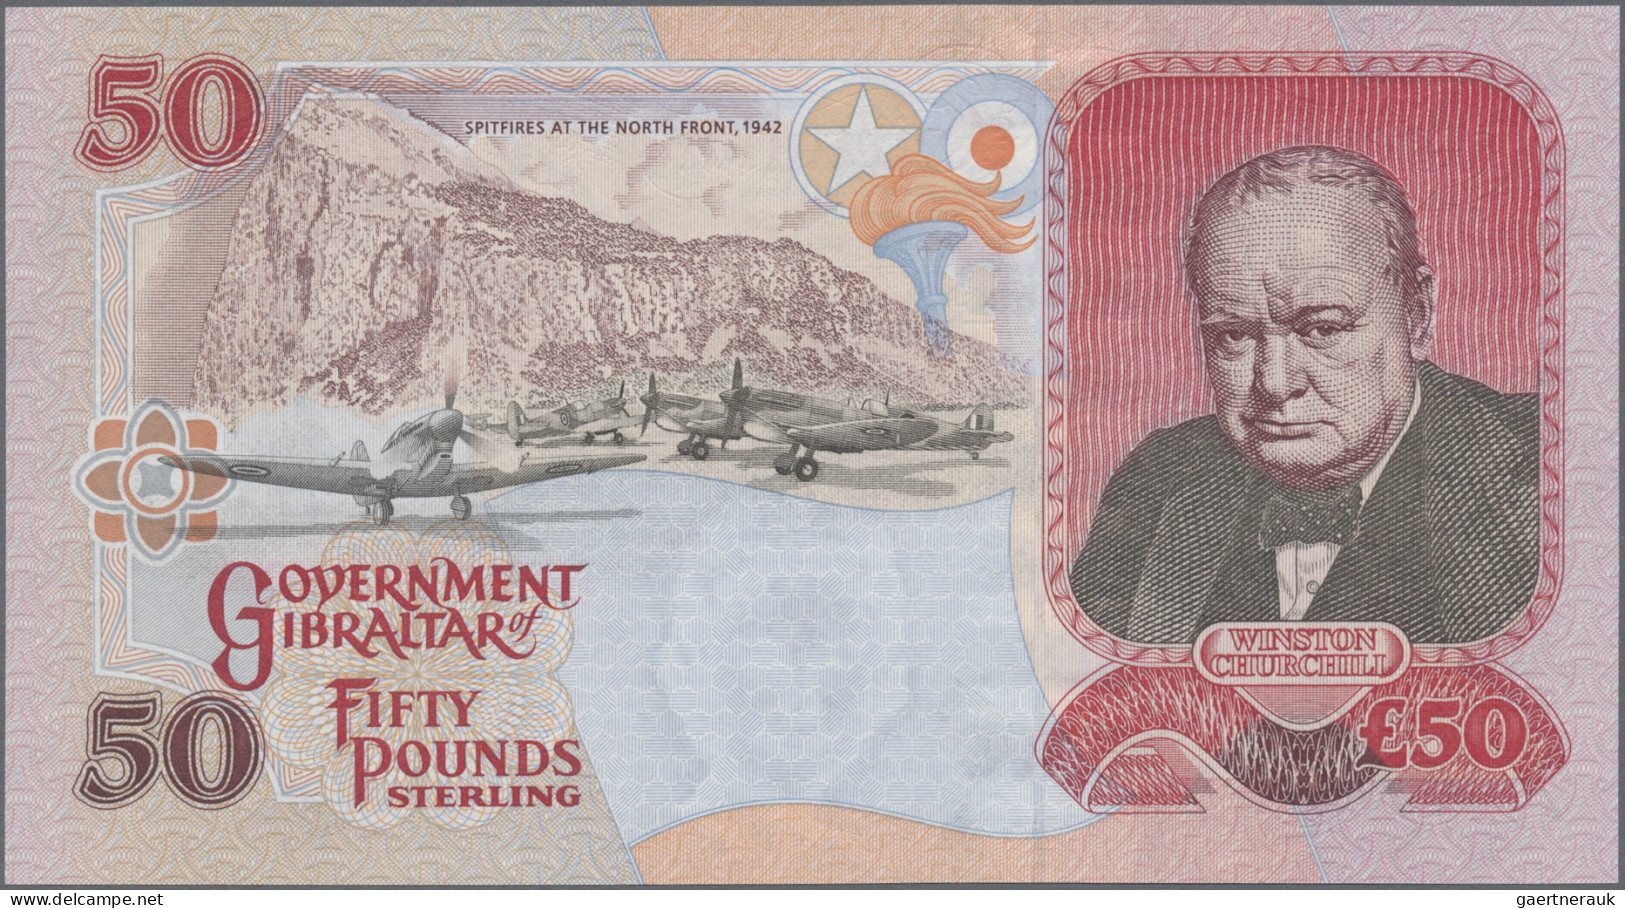 Gibraltar: Government of Gibraltar, set with 4 banknotes, comprising 10, 20 and